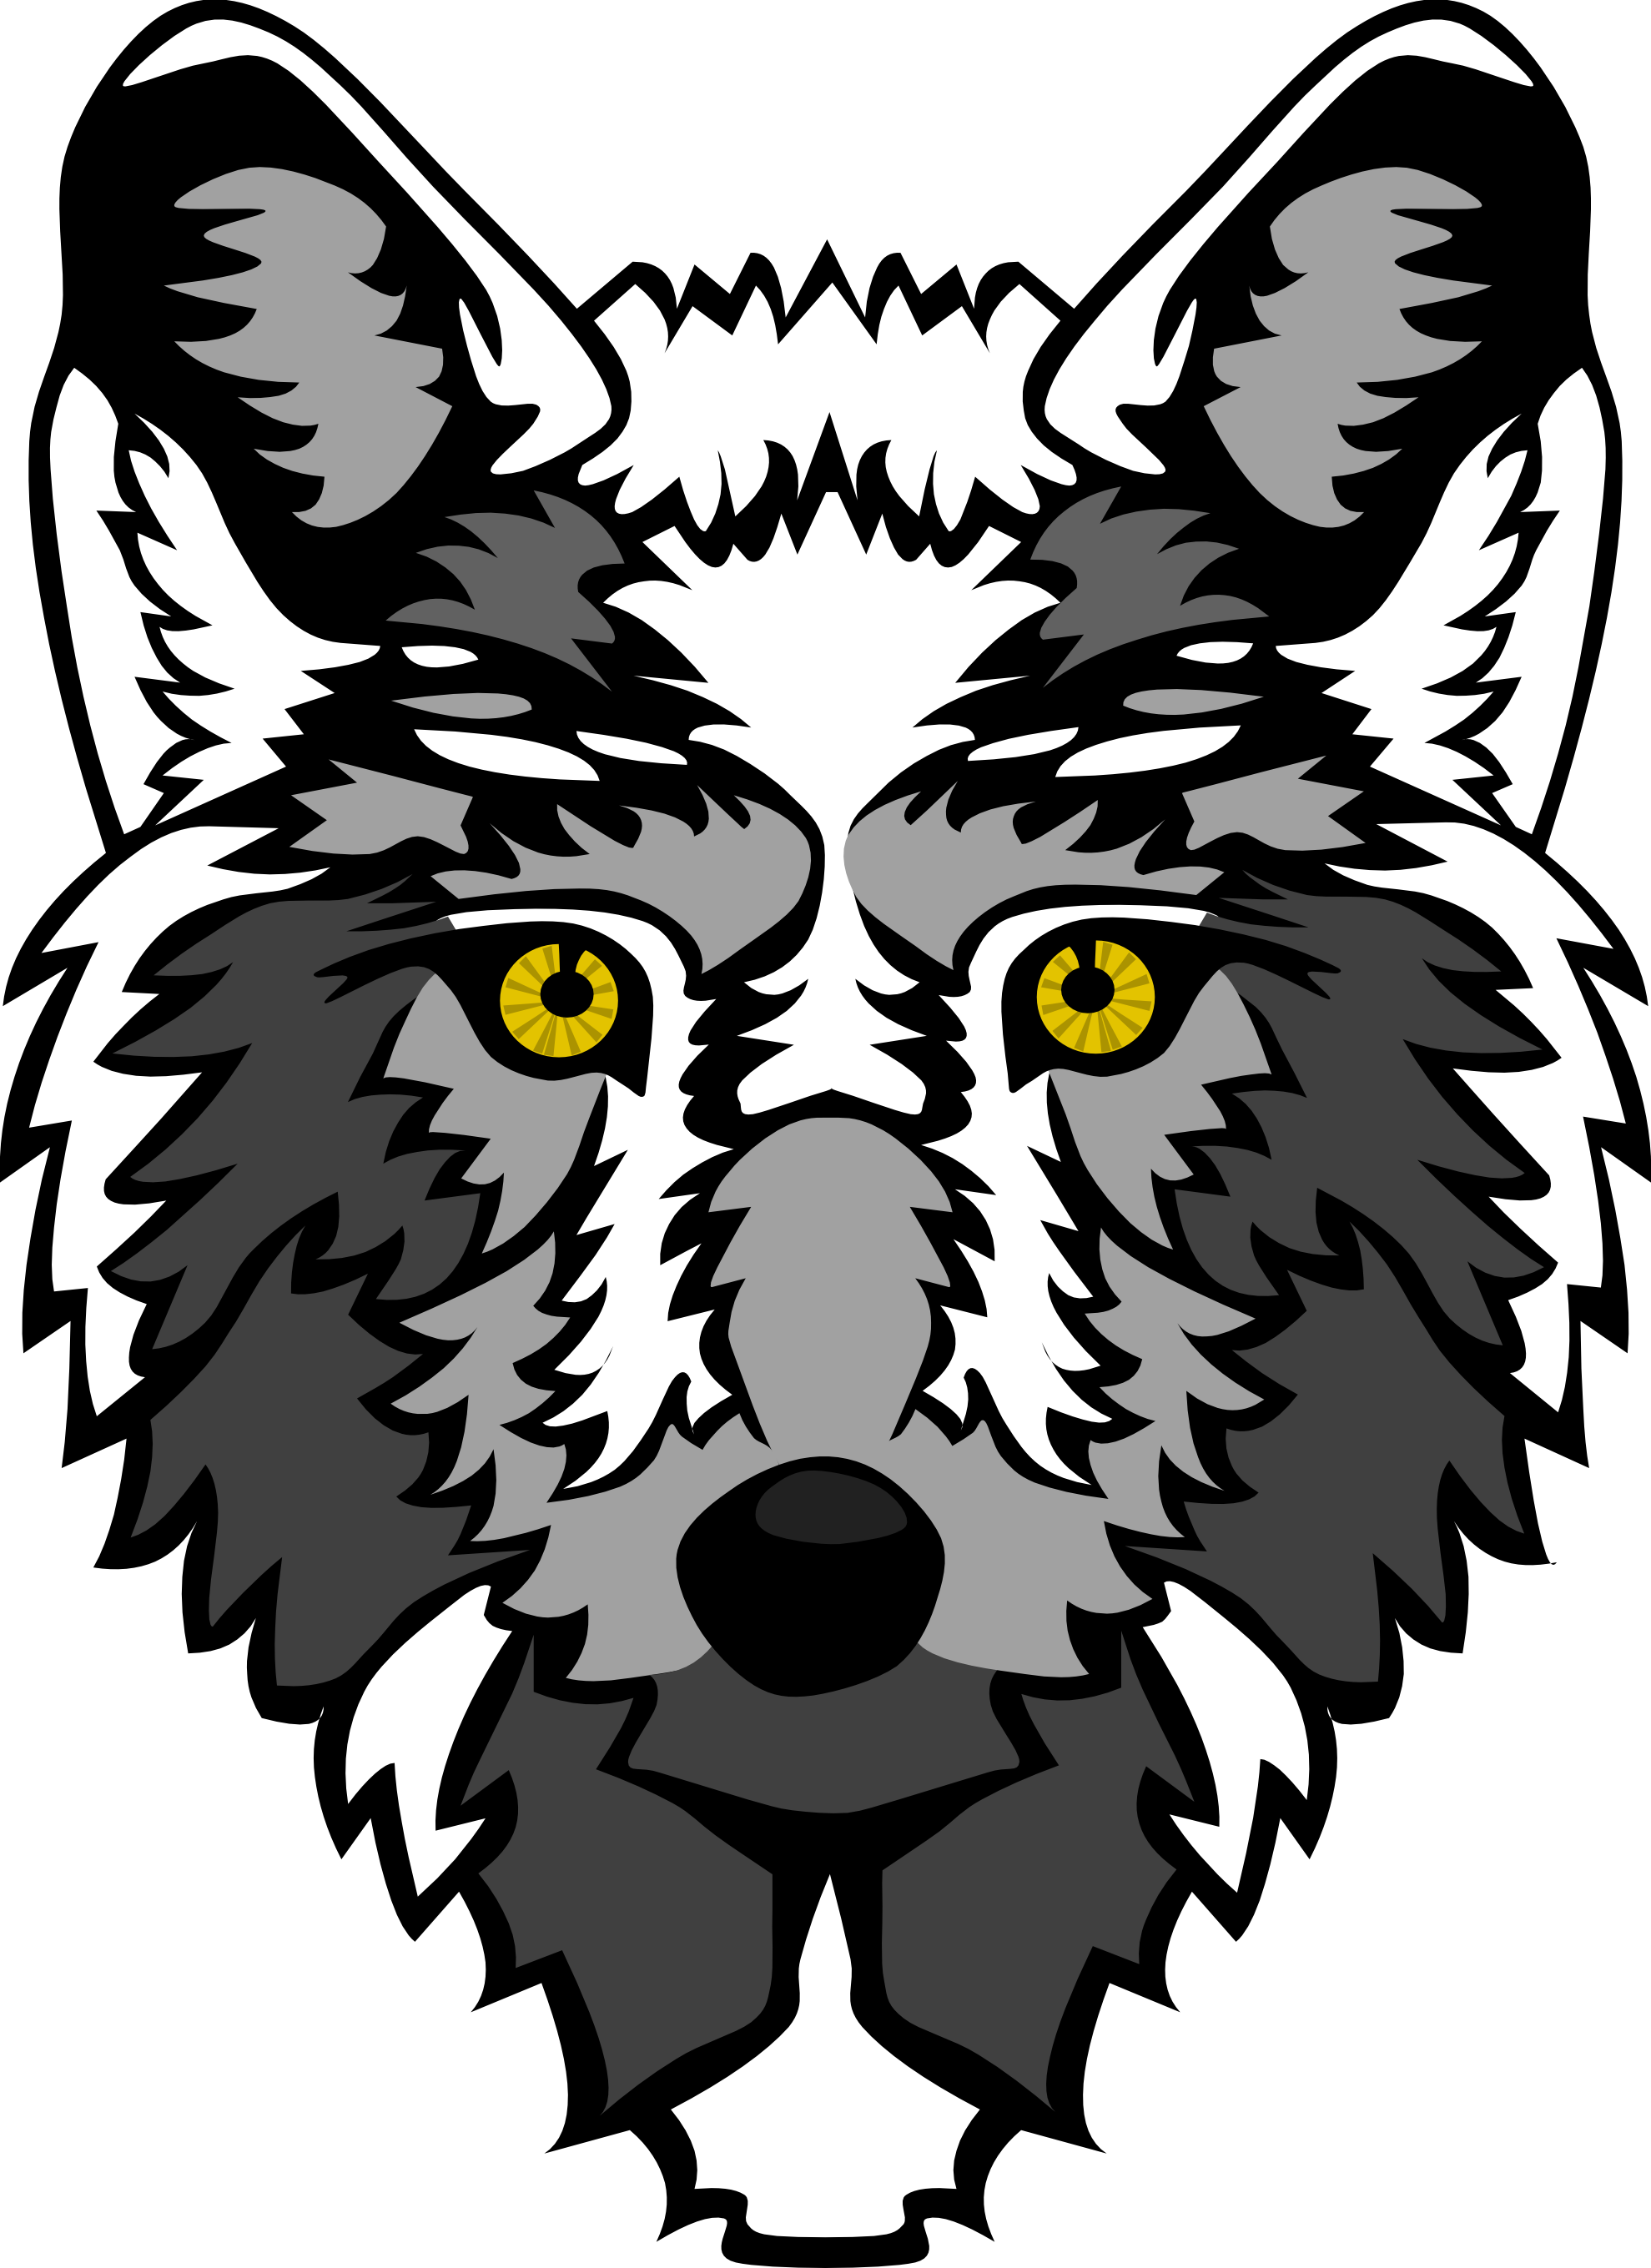 Wolf Head Stylized 1 Black White Line Art Coloring Sheet Colouring ...